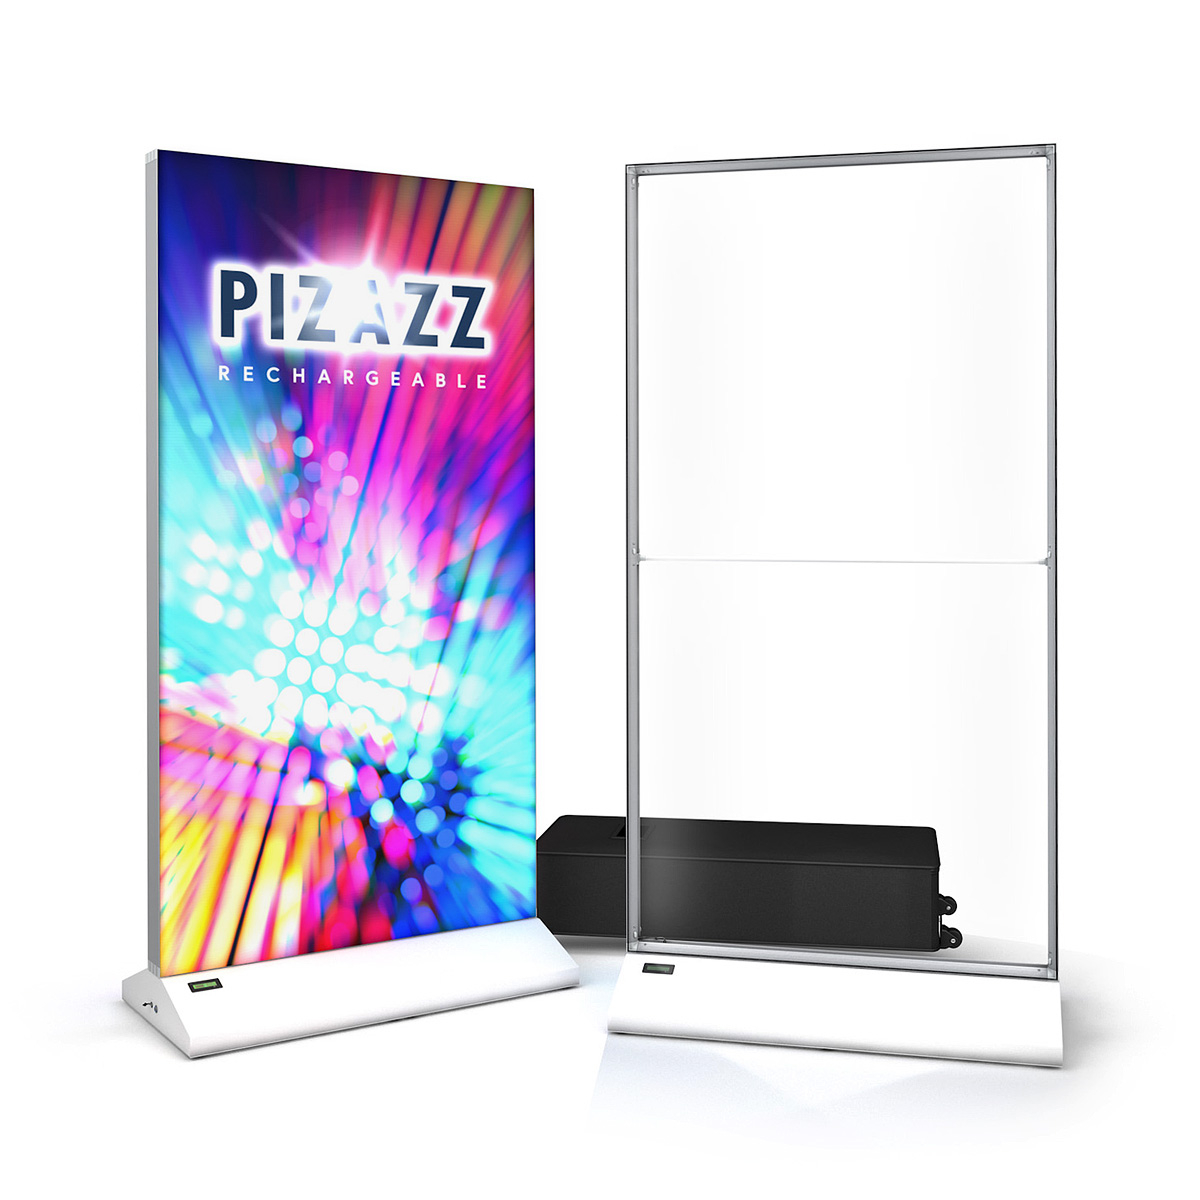 PIZAZZ Rechargeable Battery Powered LED Lightbox Display